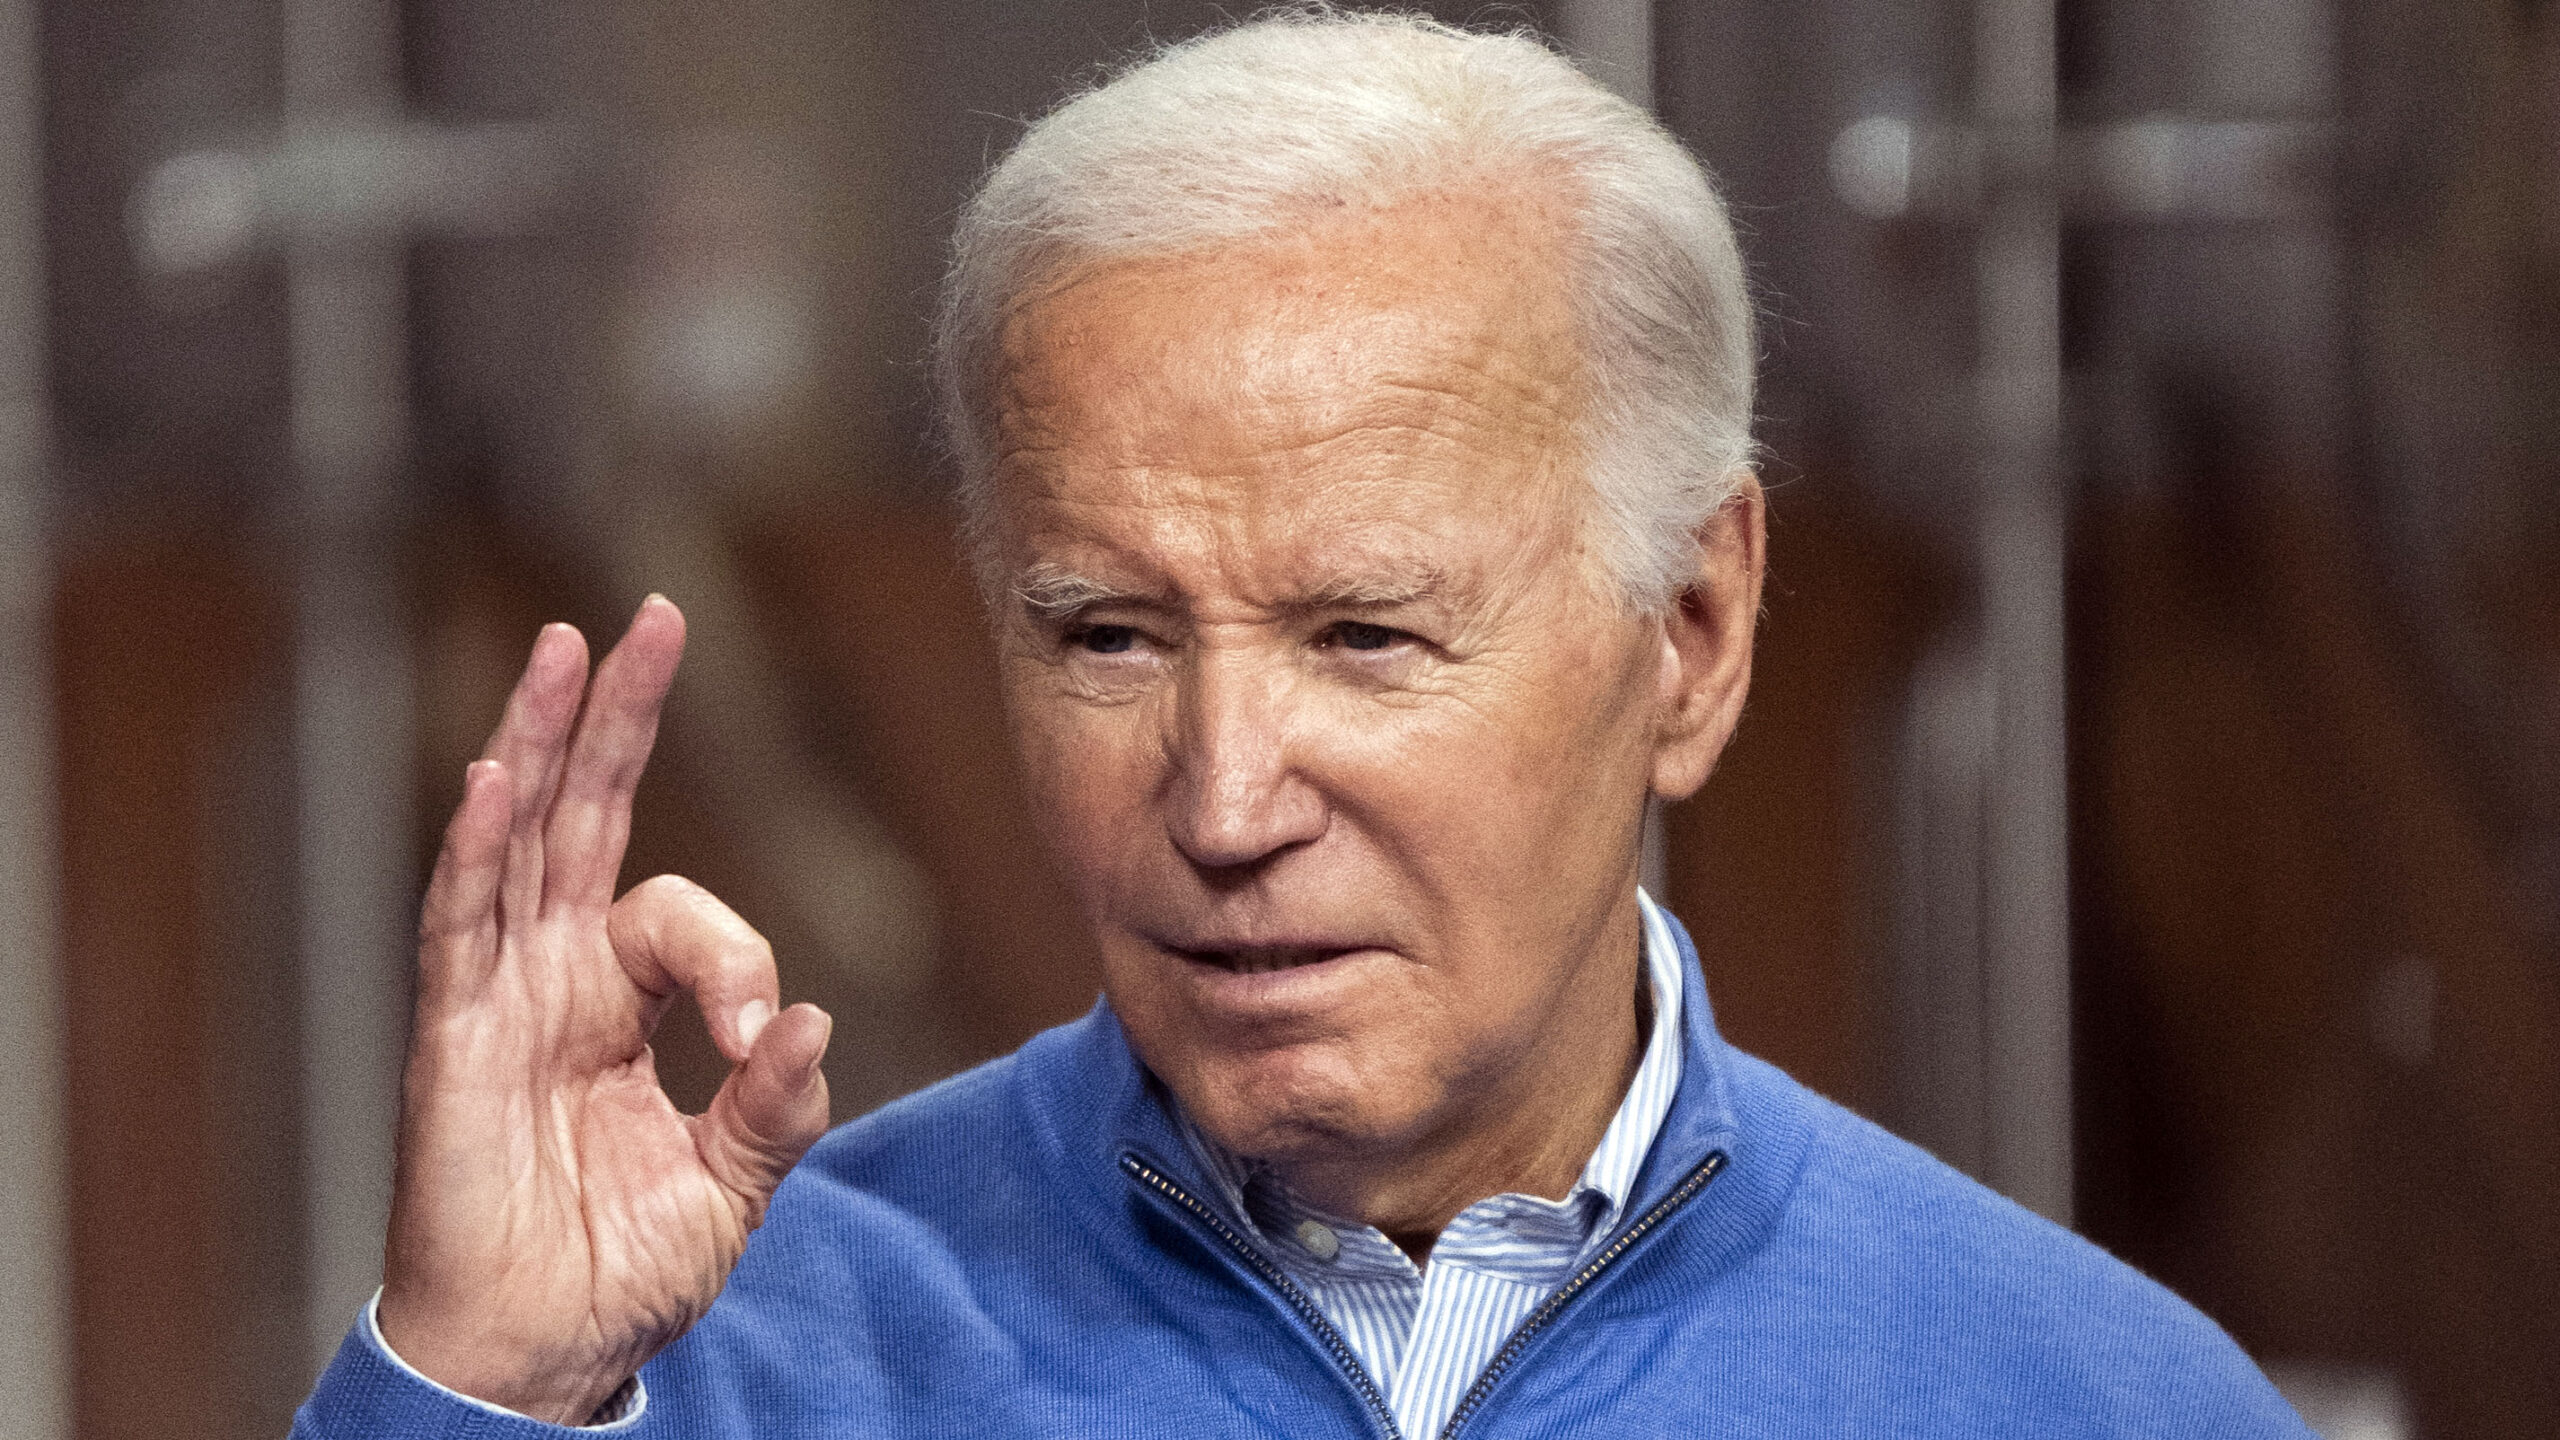 Top Biden Campaign Official On Biden Skipping Super Bowl Interview: ‘Made The Right Choice For Himself’